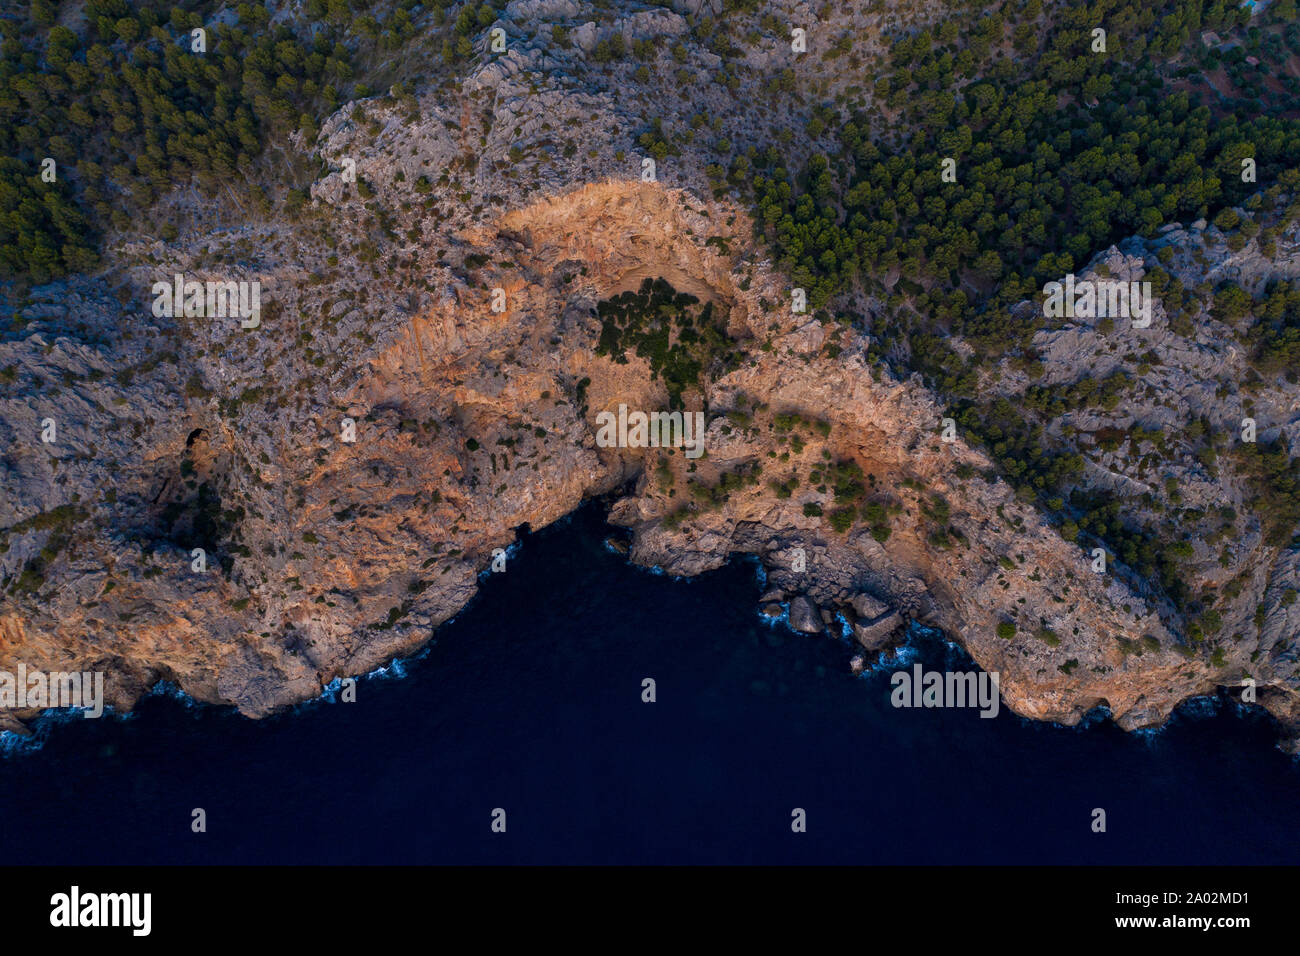 An aerial view of the dramatic Mallorcan coastline. High detail of the sunset lighting on the cliffs and trees. Stock Photo